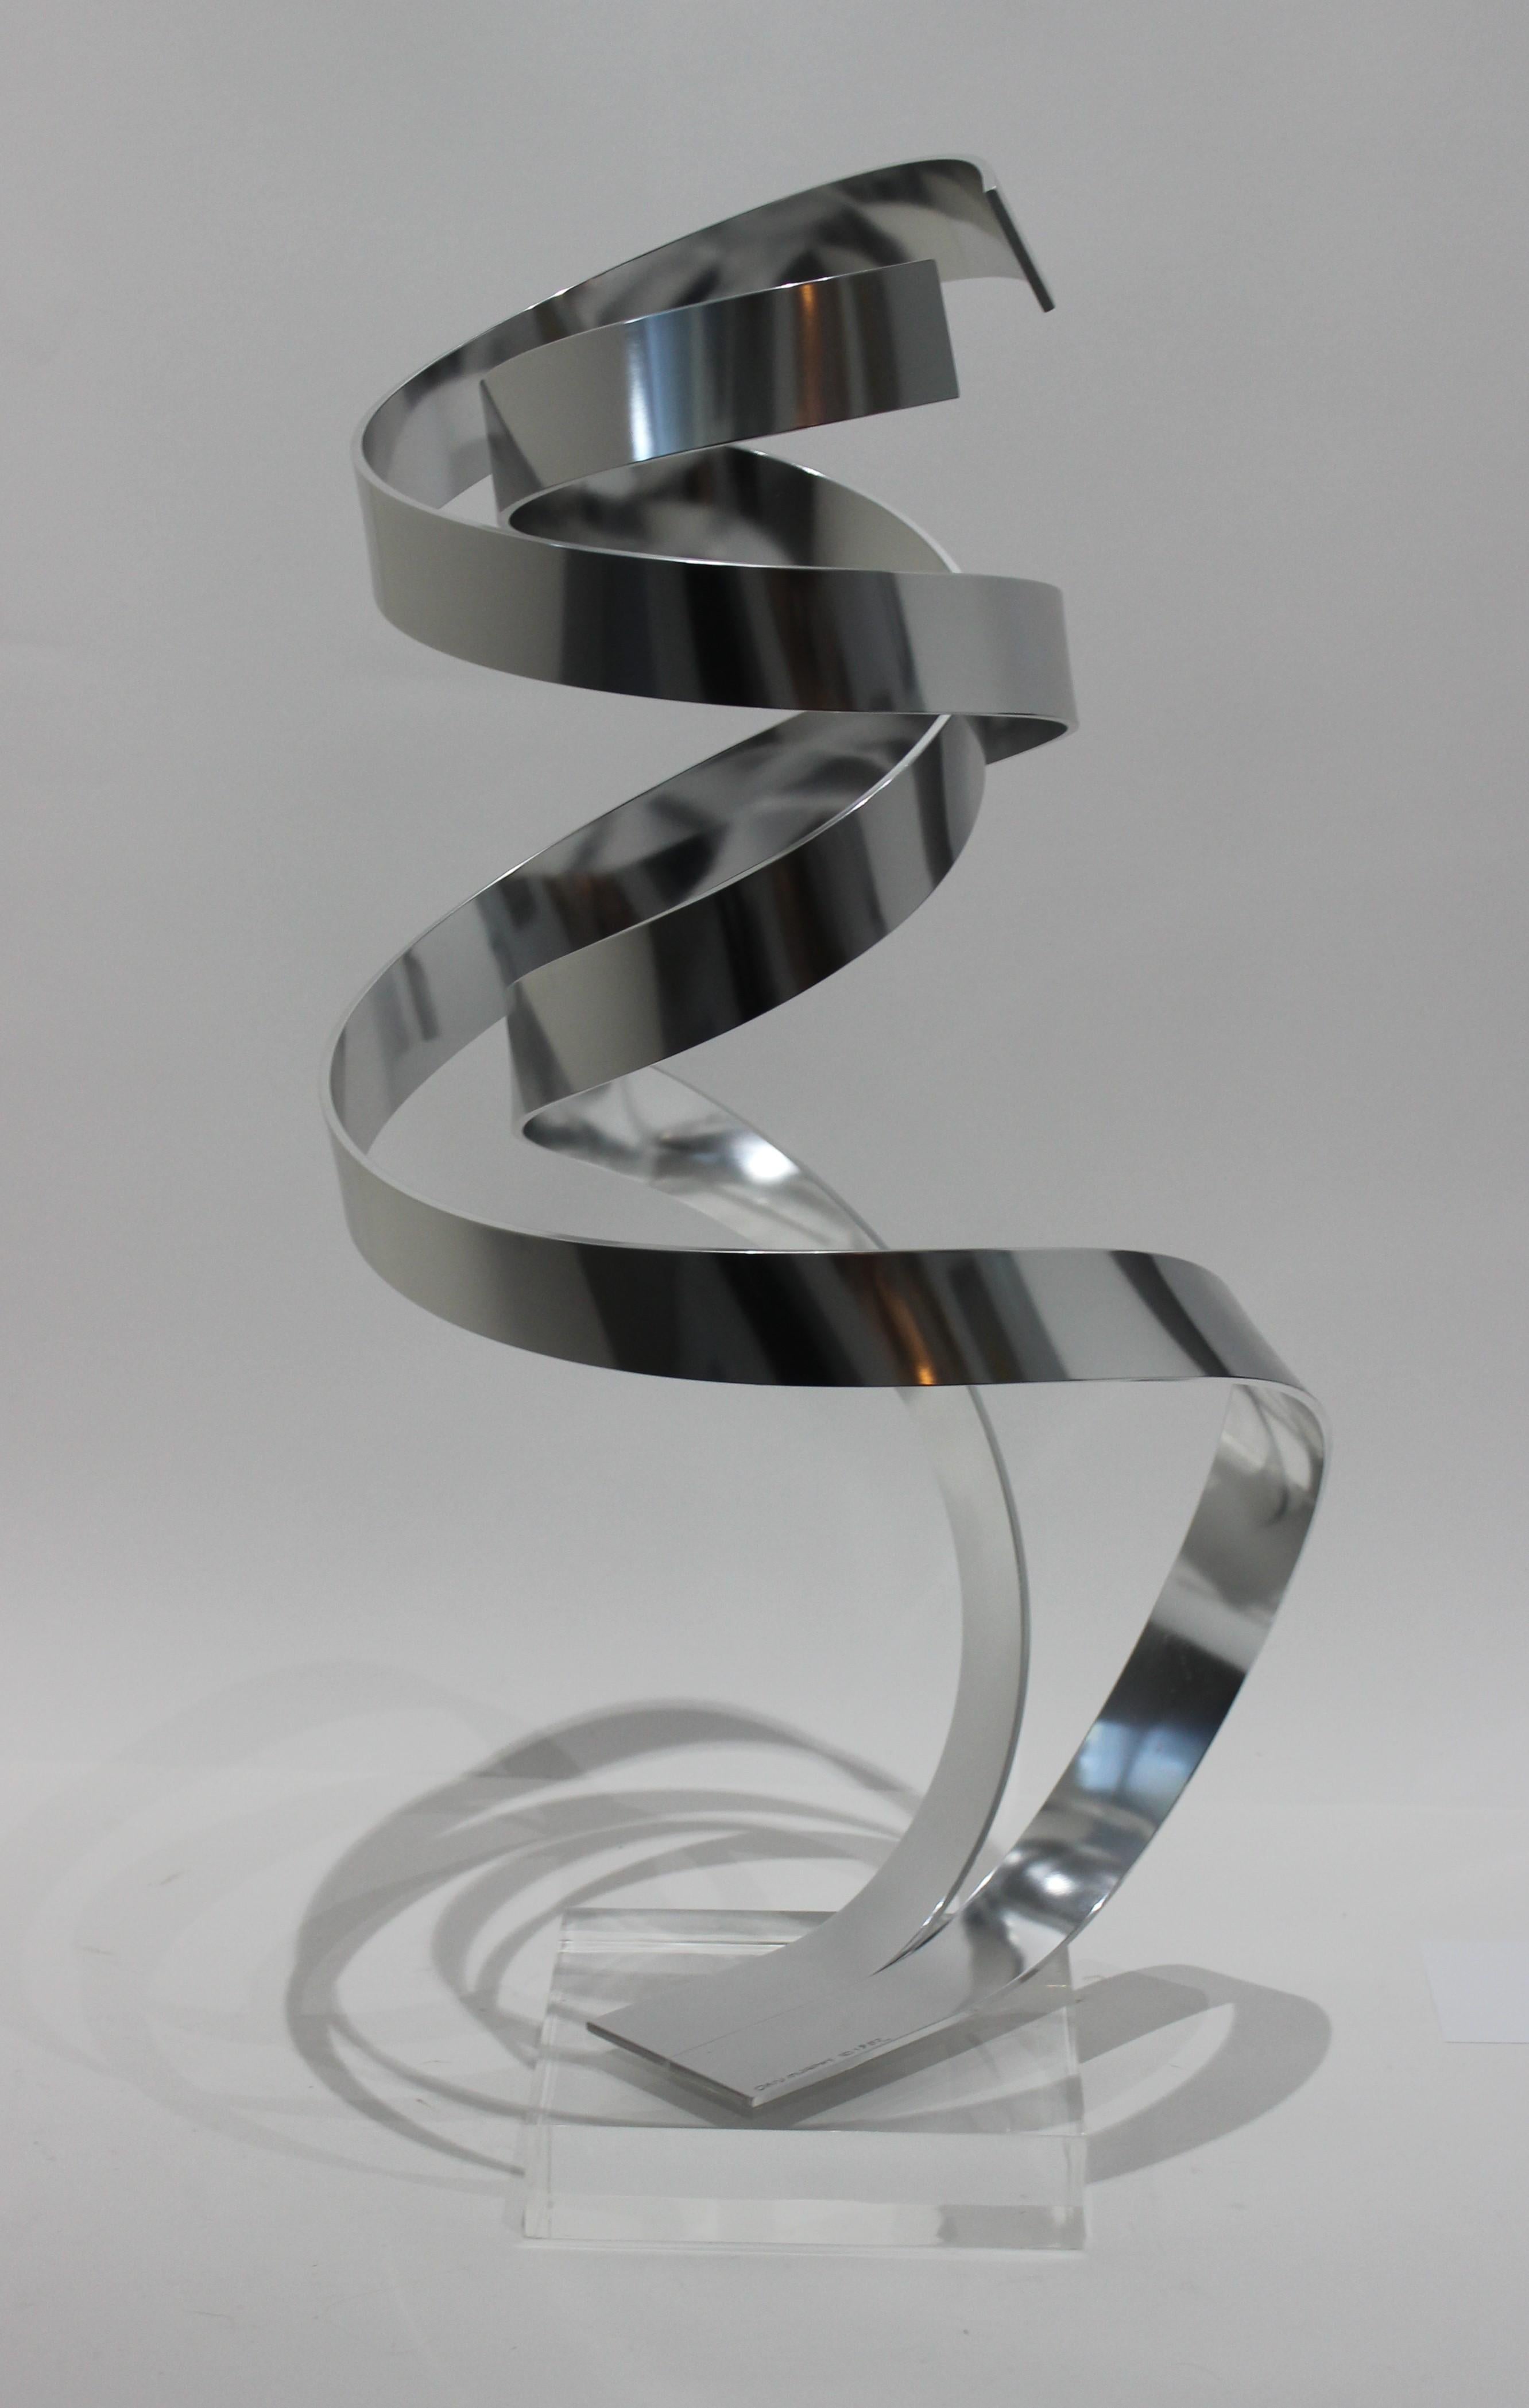 Kinetic abstract sculpture in anodized aluminum by Dan Murphy, 1982.

Note: Exhibits a wonderful springy movement when moved or touched.